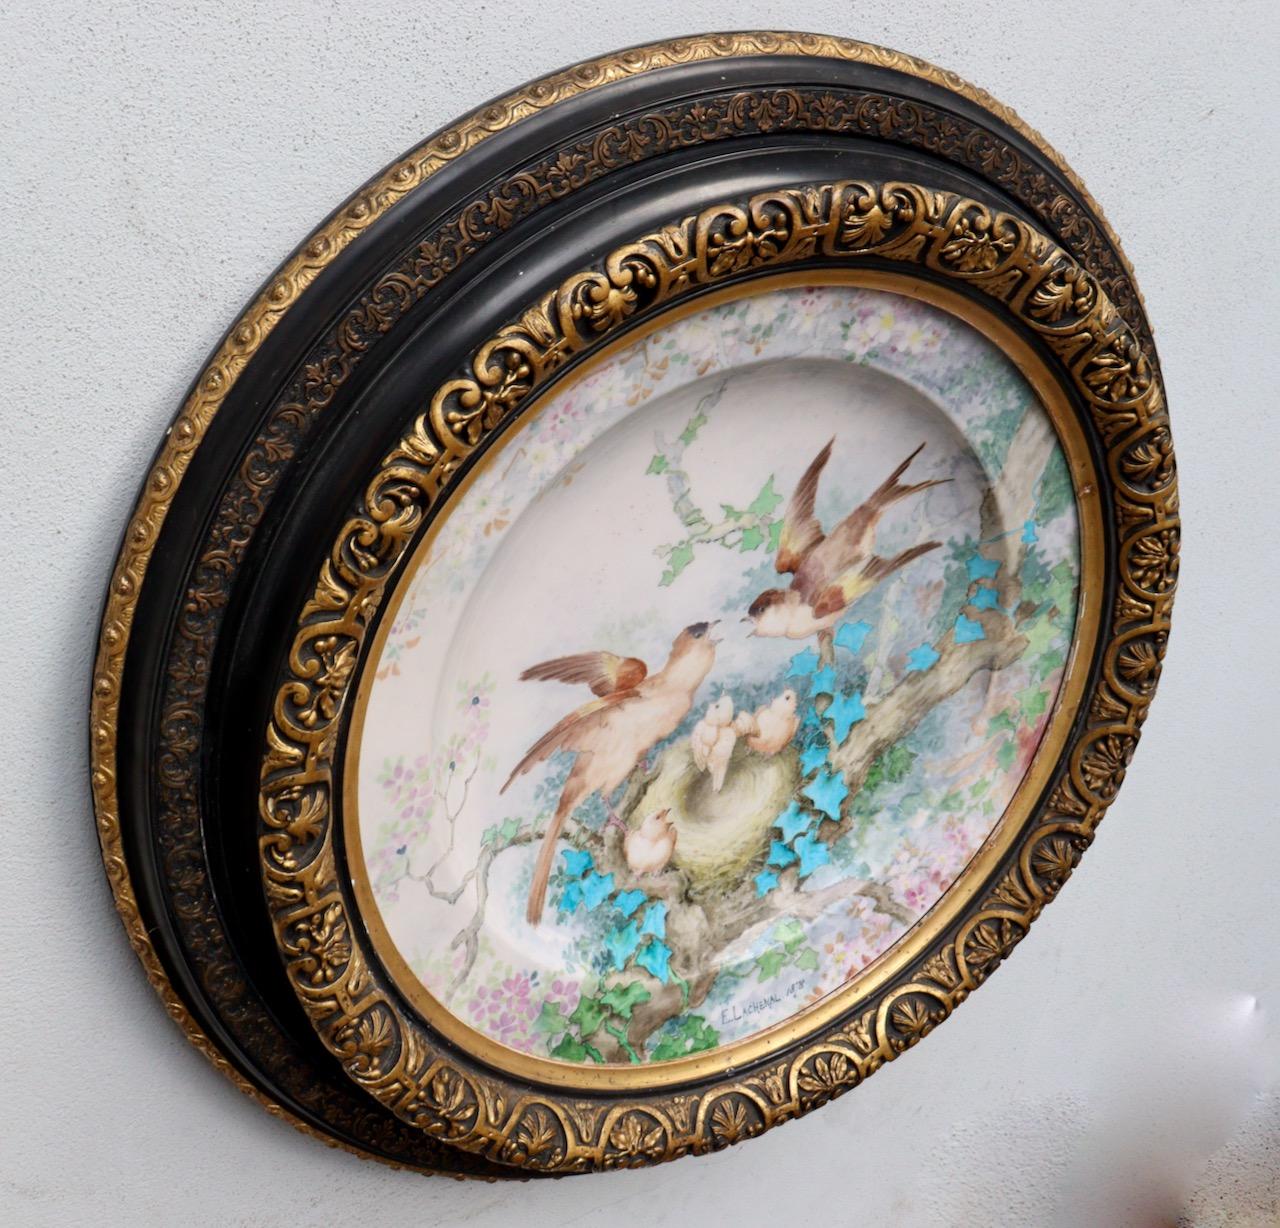 Hand-Painted Théodore Deck & Edmond Lachenal, an Impressive 19th Century Framed Charger